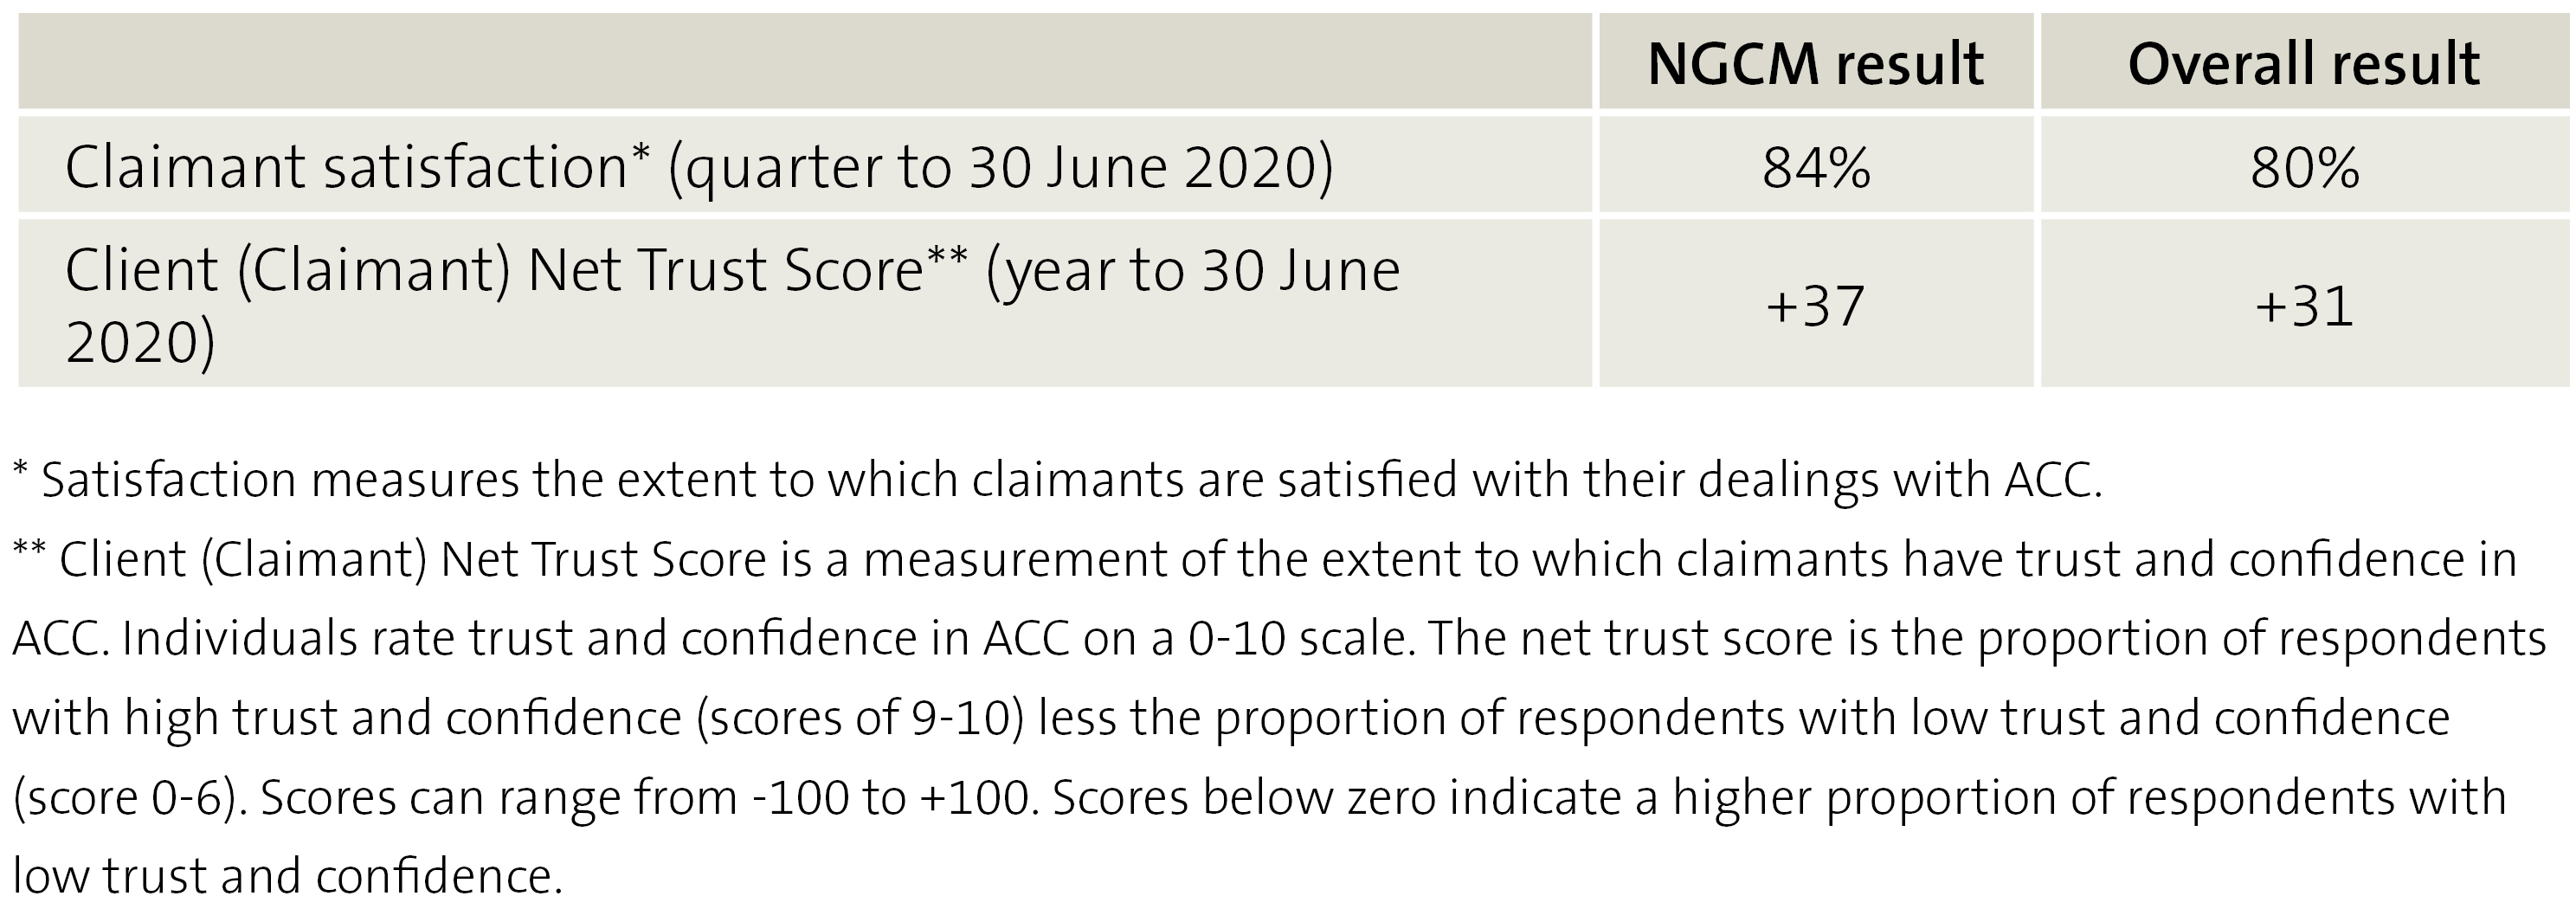 Figure 3 Comparing claimant experience results under NGCM and overall results across all cases